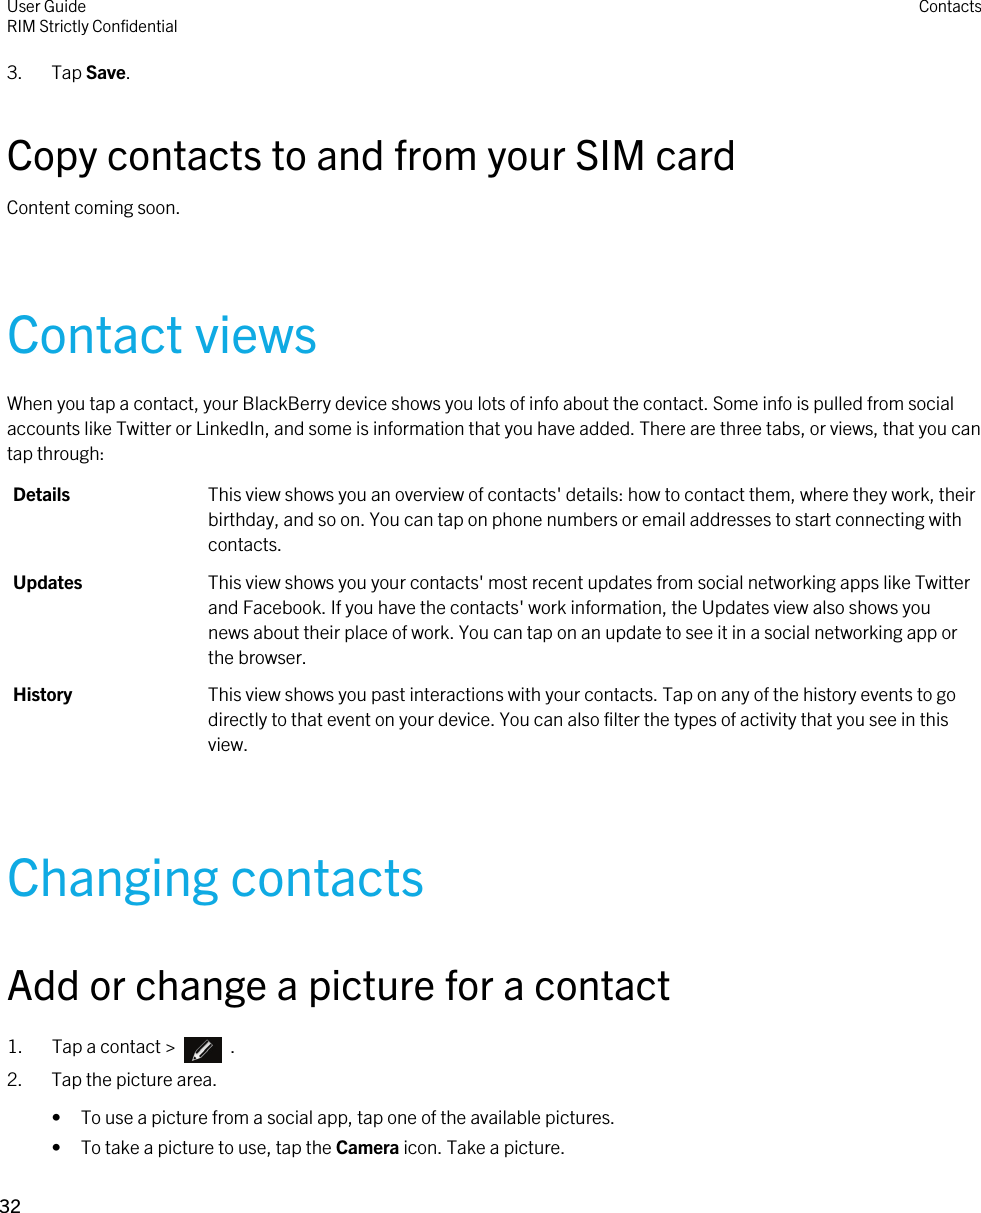 3. Tap Save.Copy contacts to and from your SIM cardContent coming soon.Contact viewsWhen you tap a contact, your BlackBerry device shows you lots of info about the contact. Some info is pulled from social accounts like Twitter or LinkedIn, and some is information that you have added. There are three tabs, or views, that you can tap through:Details This view shows you an overview of contacts&apos; details: how to contact them, where they work, their birthday, and so on. You can tap on phone numbers or email addresses to start connecting with contacts.Updates This view shows you your contacts&apos; most recent updates from social networking apps like Twitter and Facebook. If you have the contacts&apos; work information, the Updates view also shows you news about their place of work. You can tap on an update to see it in a social networking app or the browser.History This view shows you past interactions with your contacts. Tap on any of the history events to go directly to that event on your device. You can also filter the types of activity that you see in this view.Changing contactsAdd or change a picture for a contact1.  Tap a contact &gt;    .2. Tap the picture area.• To use a picture from a social app, tap one of the available pictures.• To take a picture to use, tap the Camera icon. Take a picture.User GuideRIM Strictly ConfidentialContacts32 